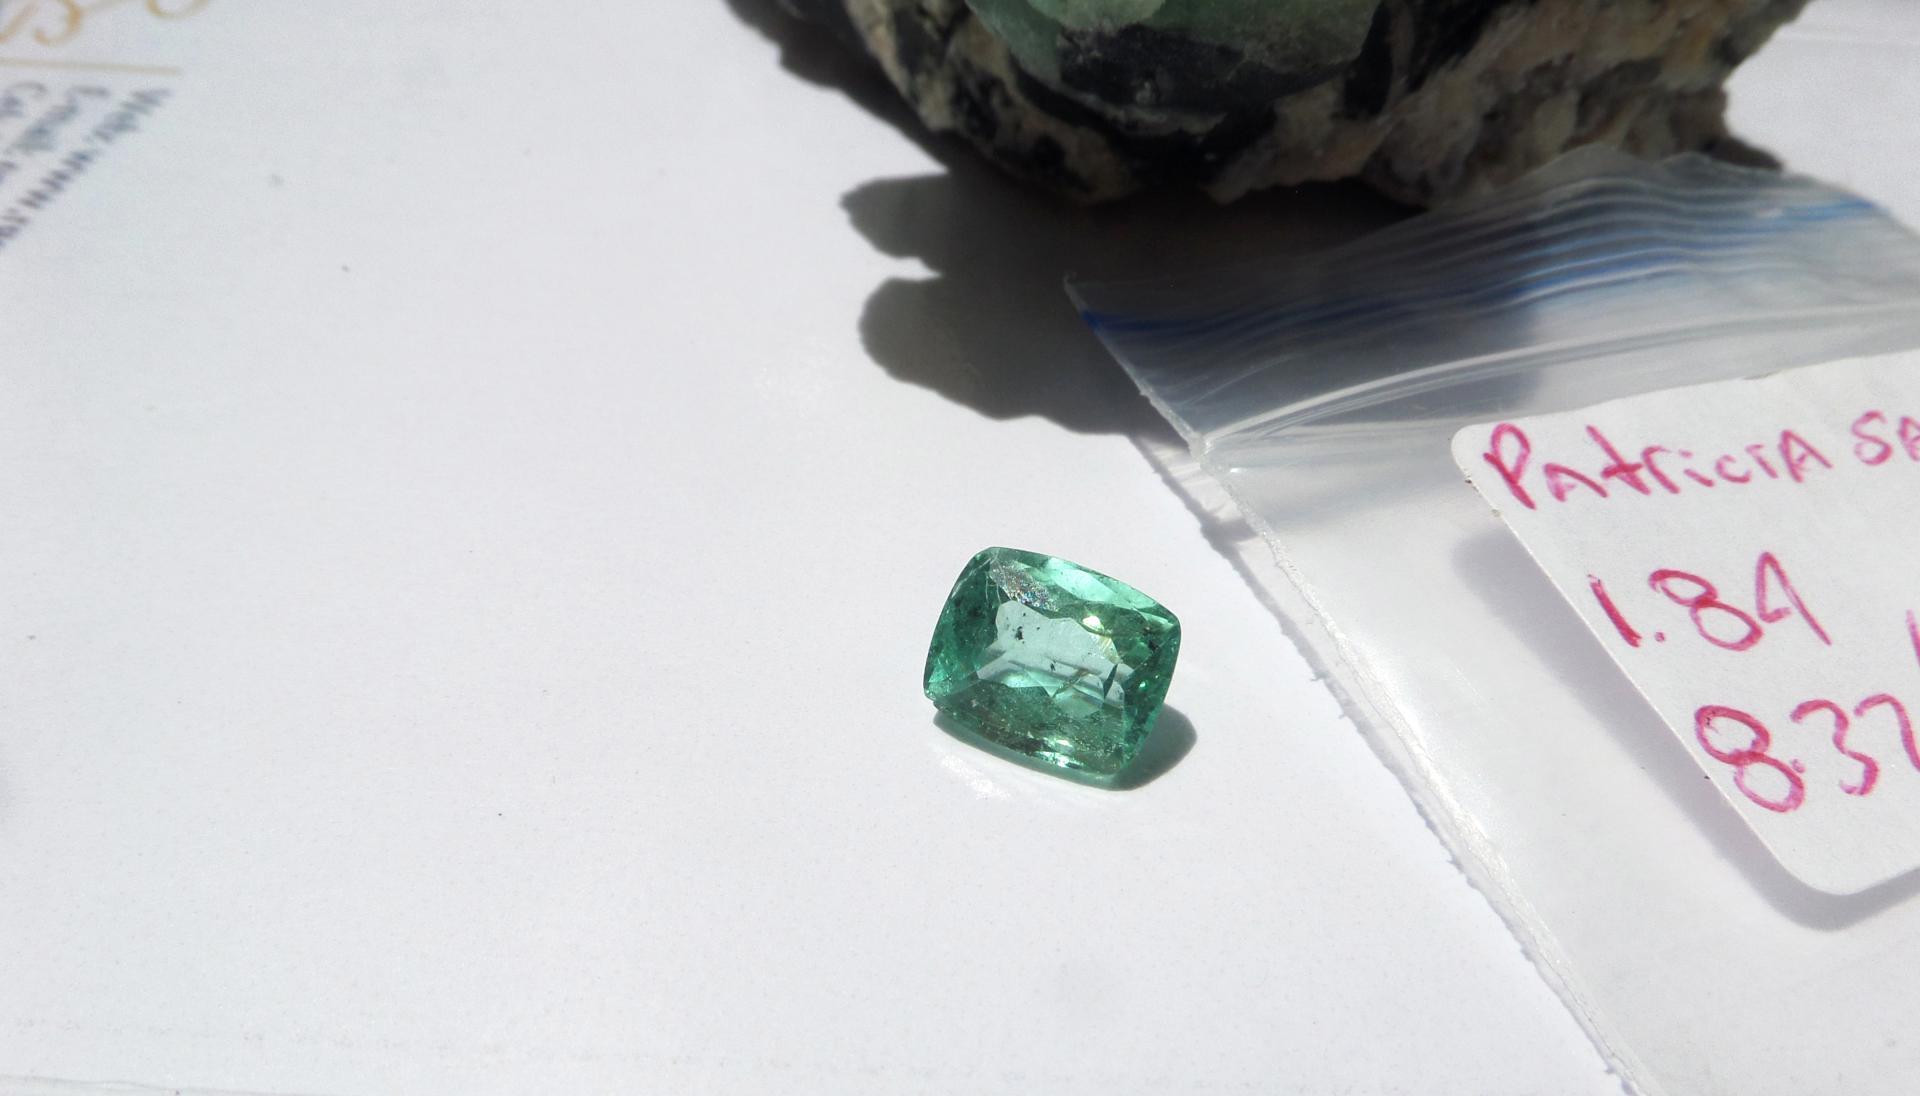 1.84 Ct. Colombian Emerald 